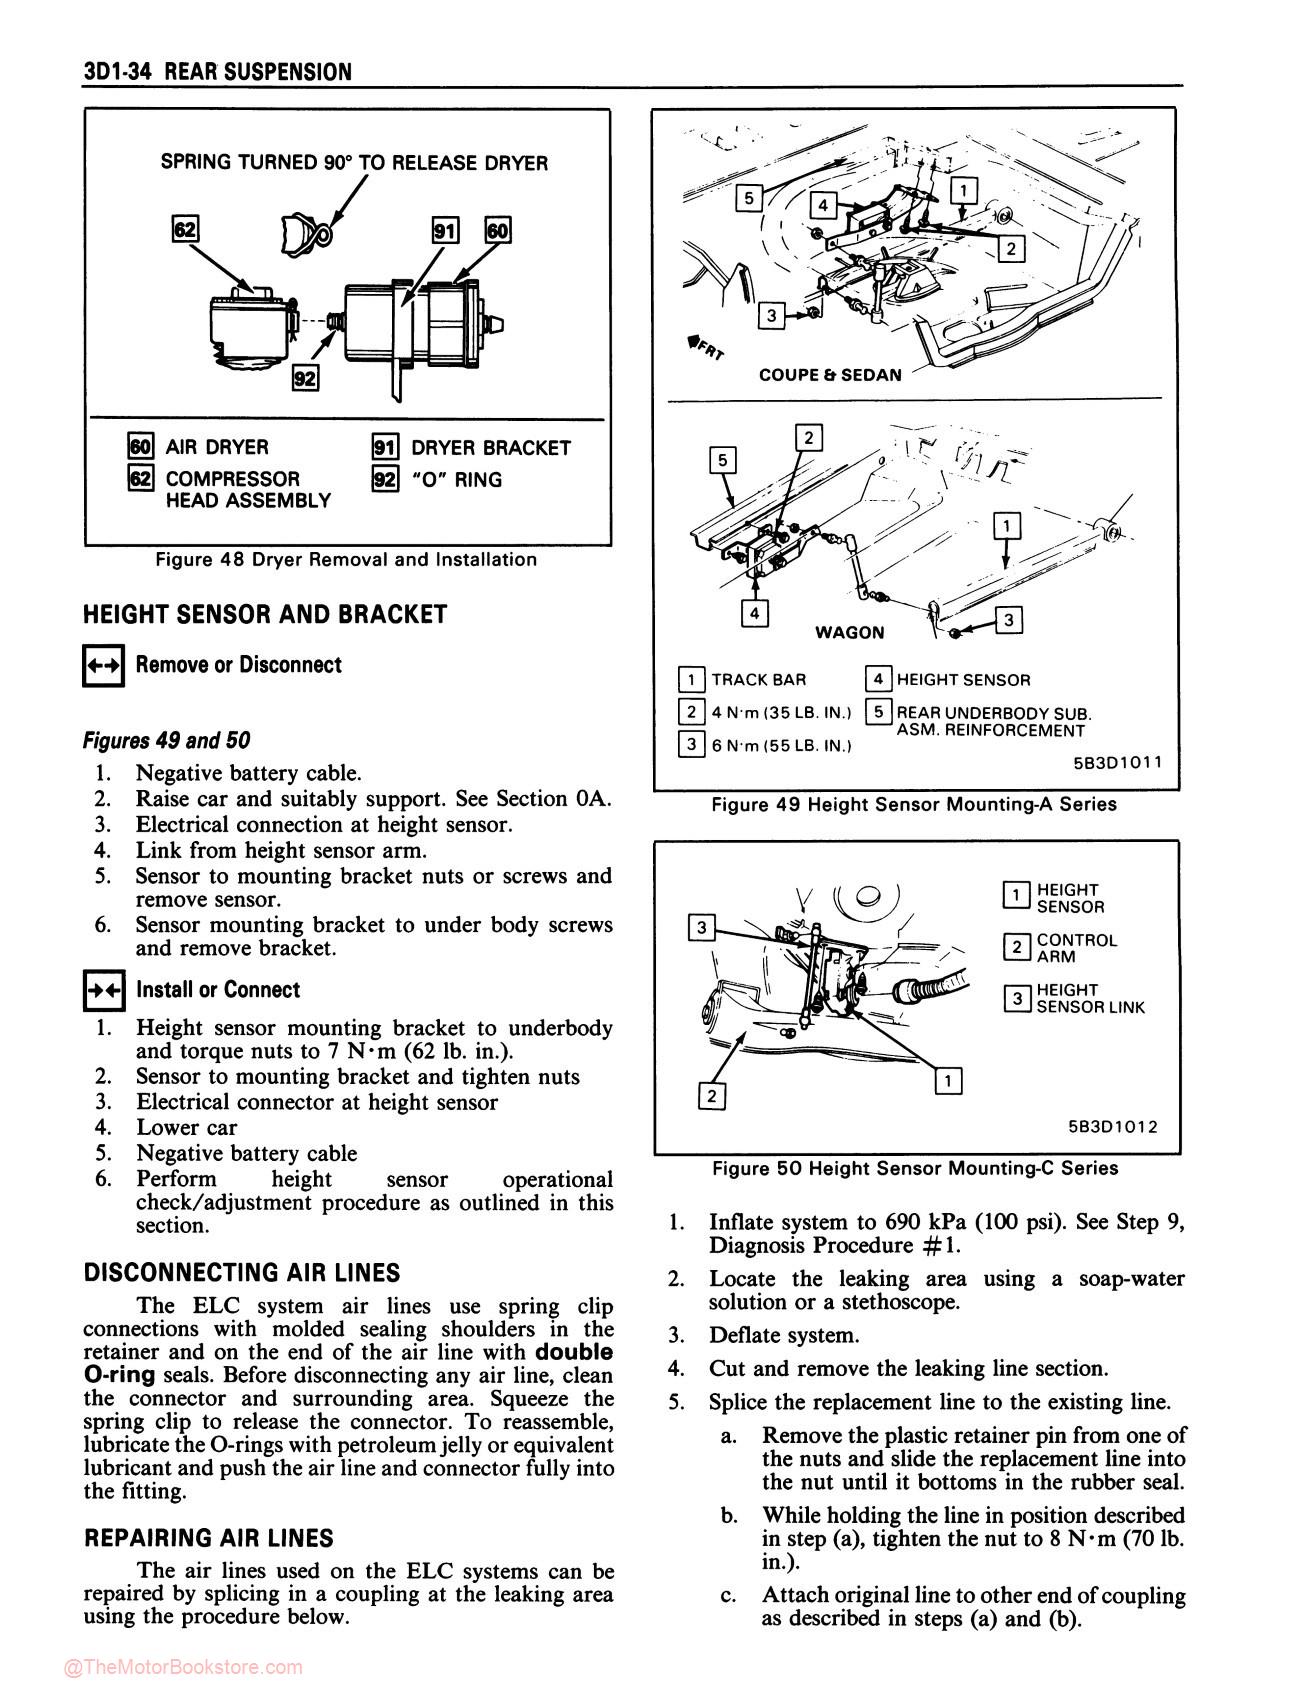 1985 Buick and Grand National Service Manual - Sample Page 1